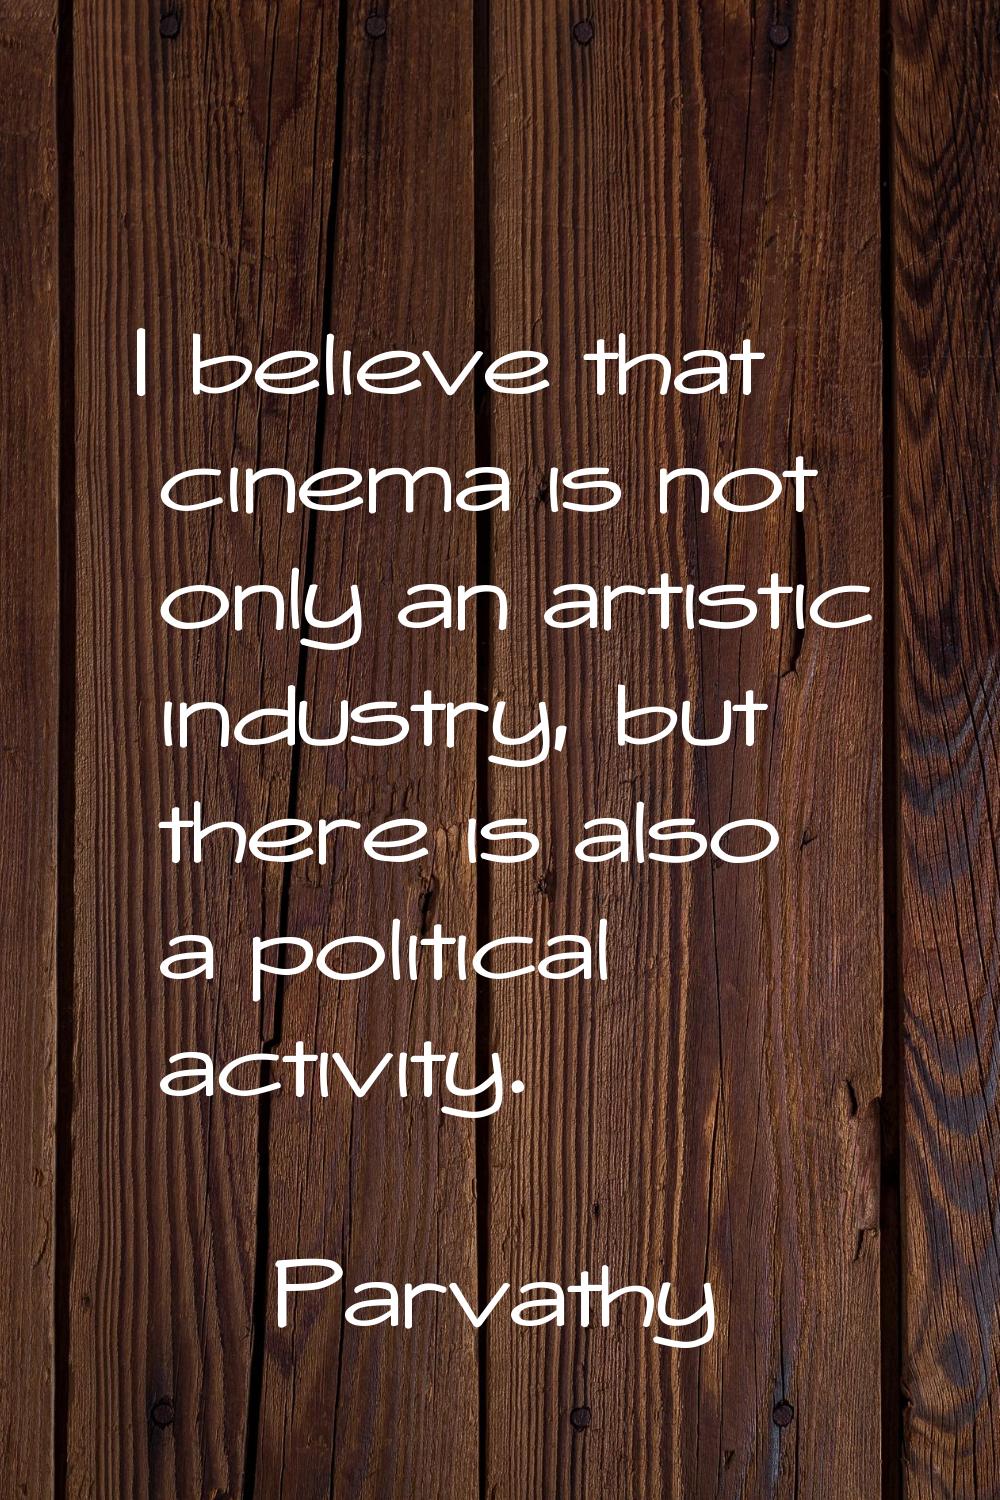 I believe that cinema is not only an artistic industry, but there is also a political activity.